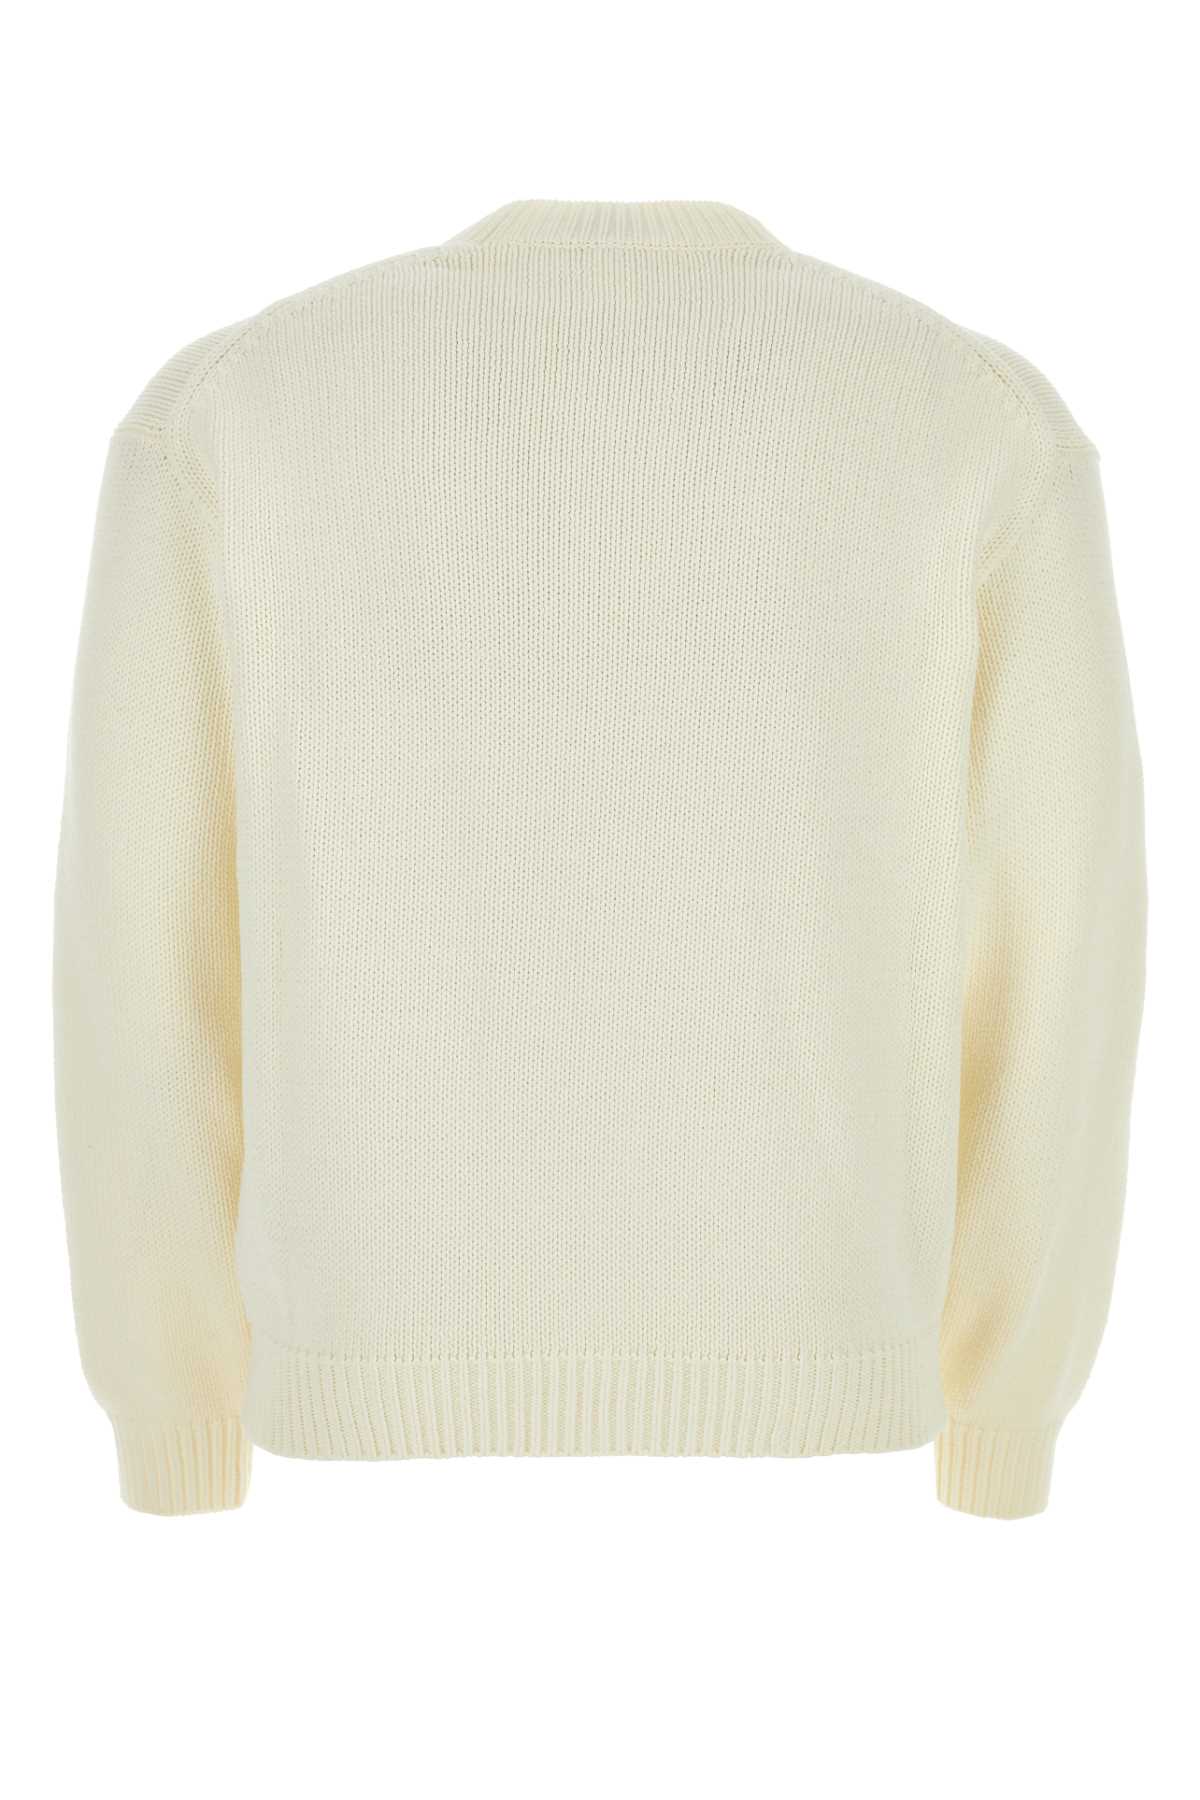 Kenzo Ivory Cotton Blend Sweater In Offwhite